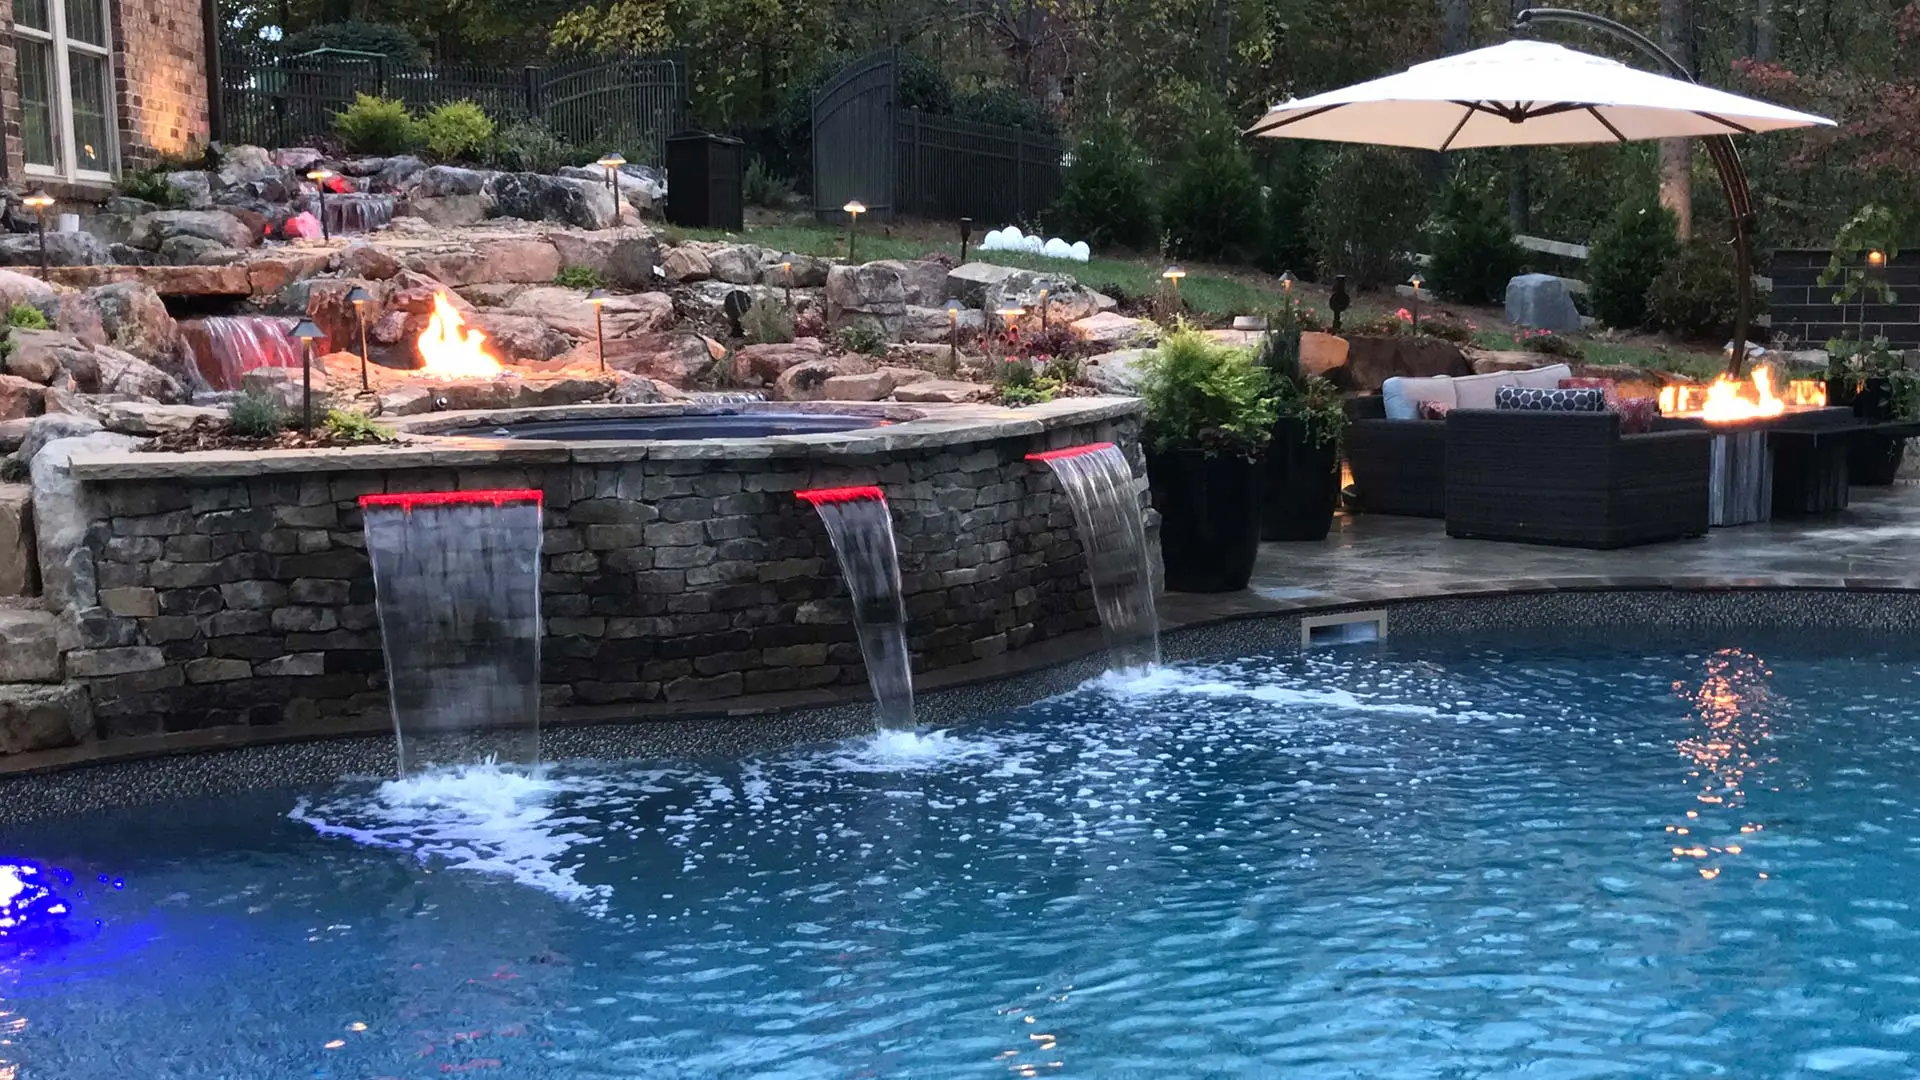 Natural rock landscaping with patio, fire pit, and water flowing into pool near Greensboro, NC.